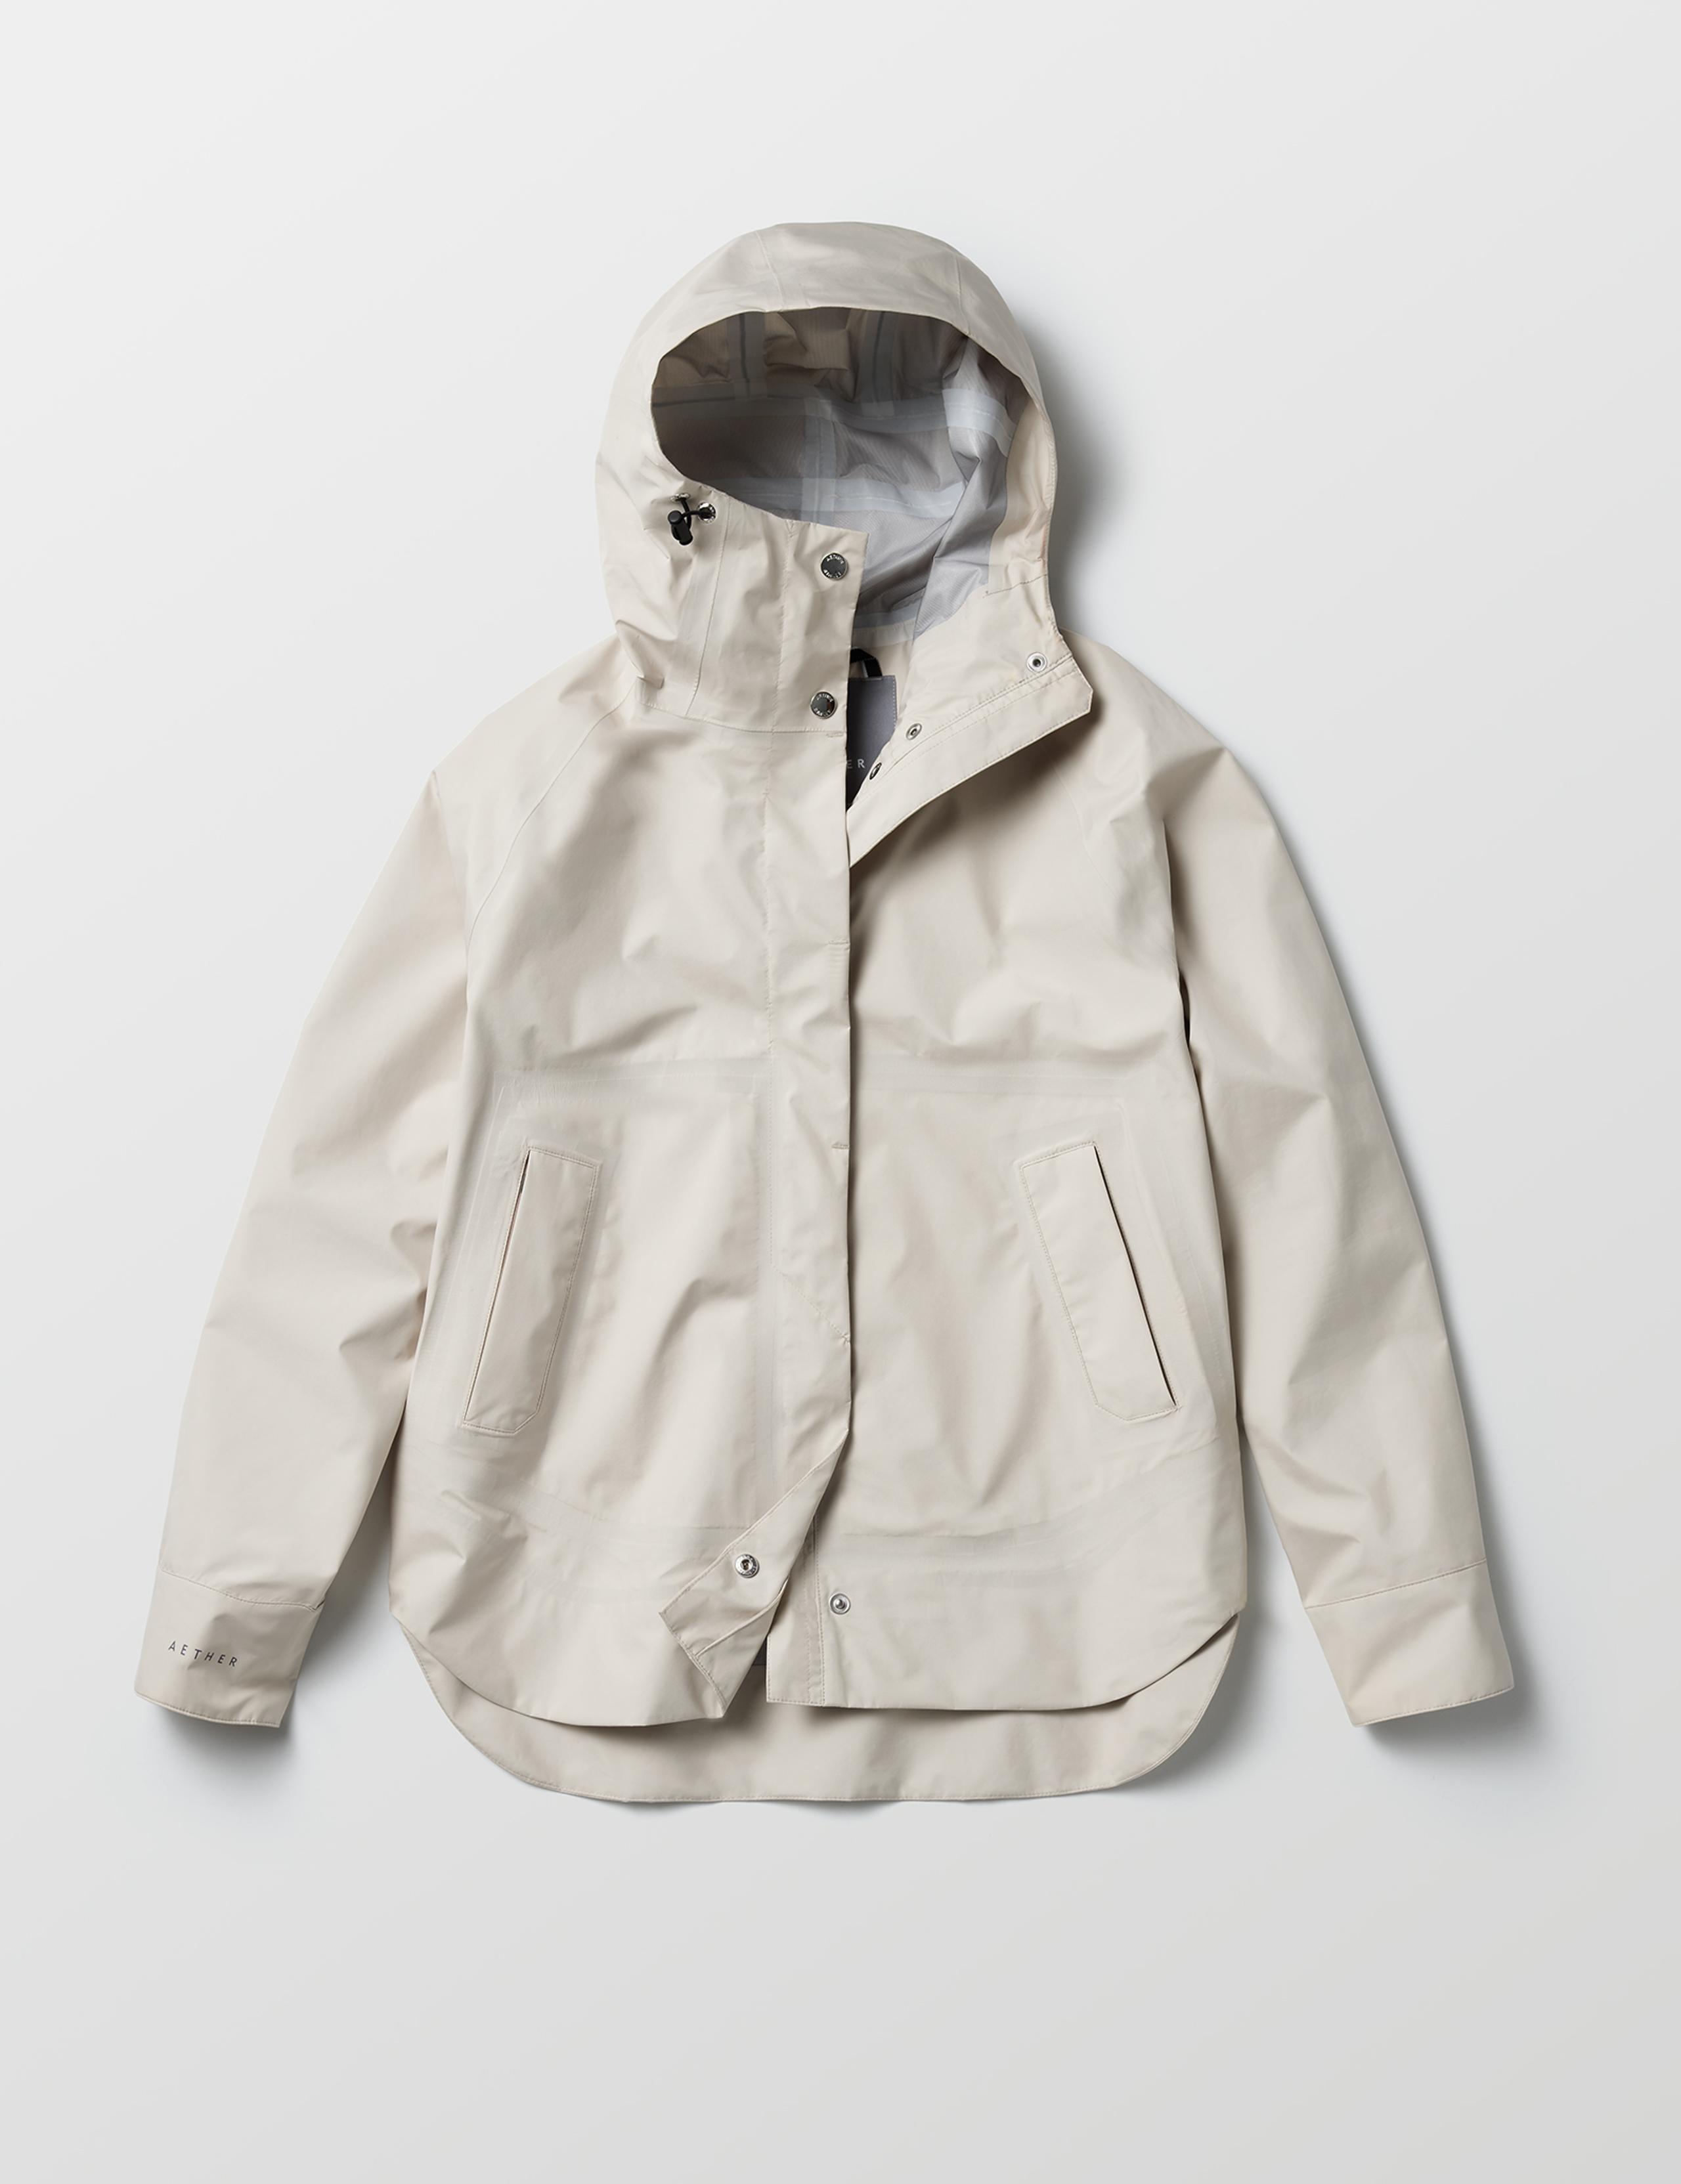 Studio lay-down of W Storm All-Weather Jacket